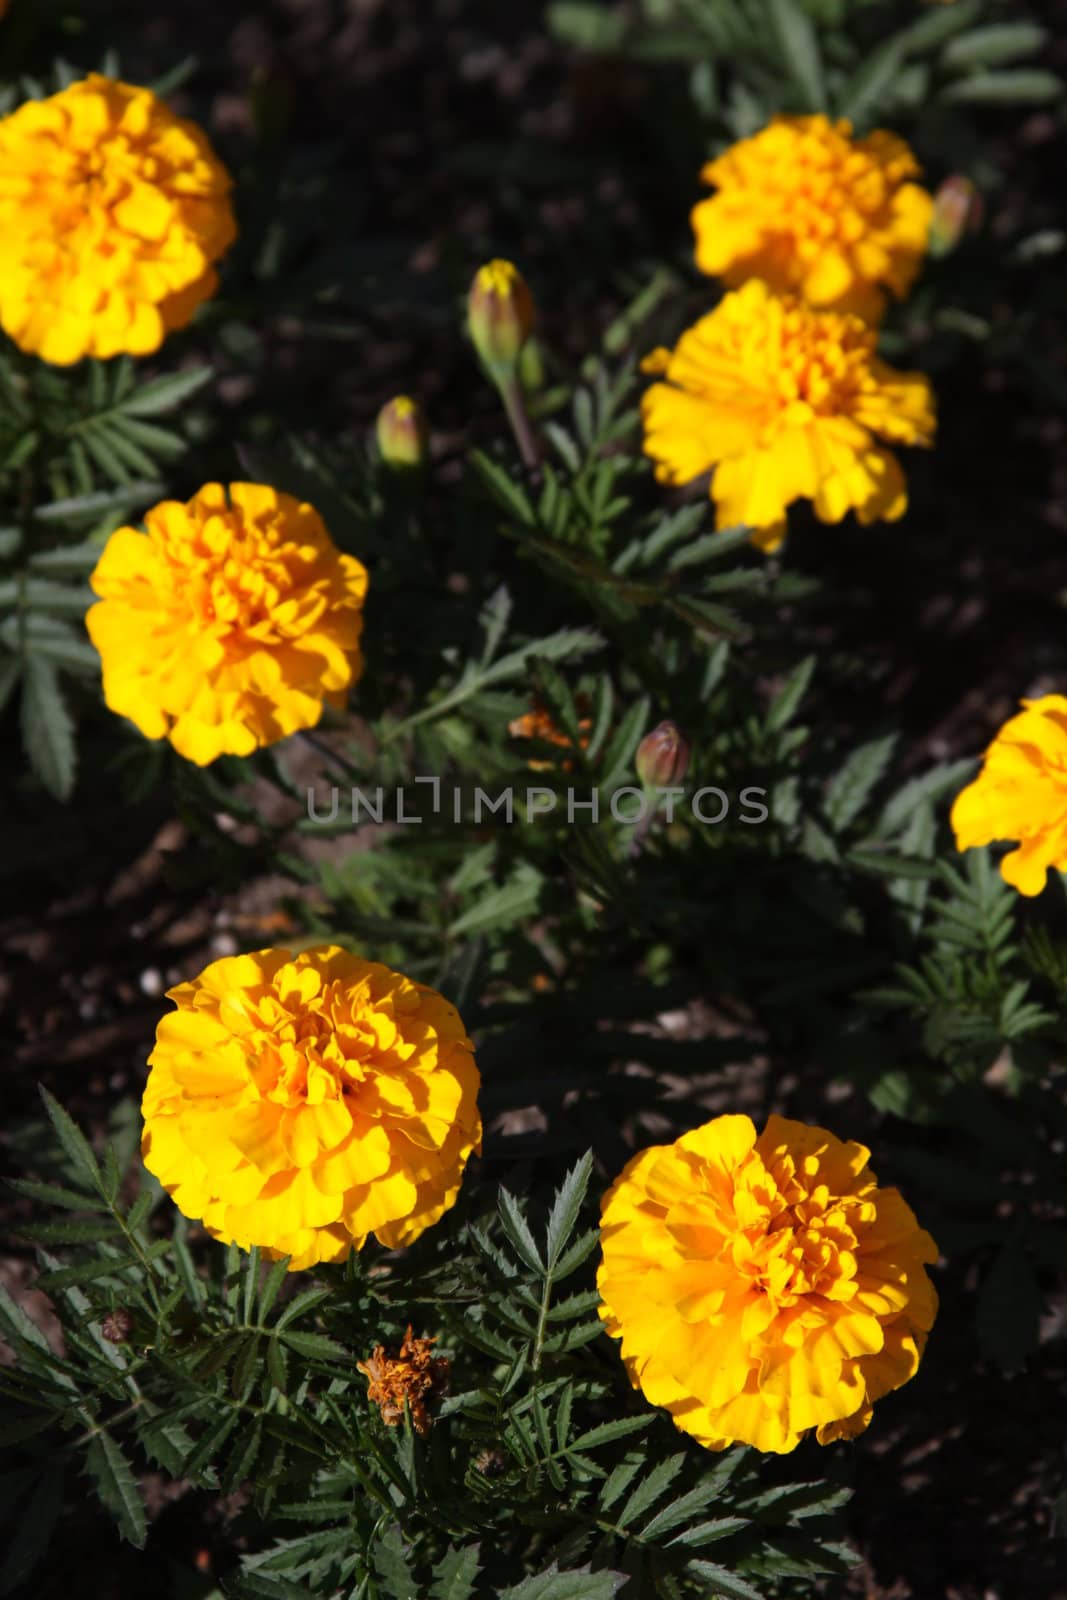 Yellow marigold flowers close up in a garden.